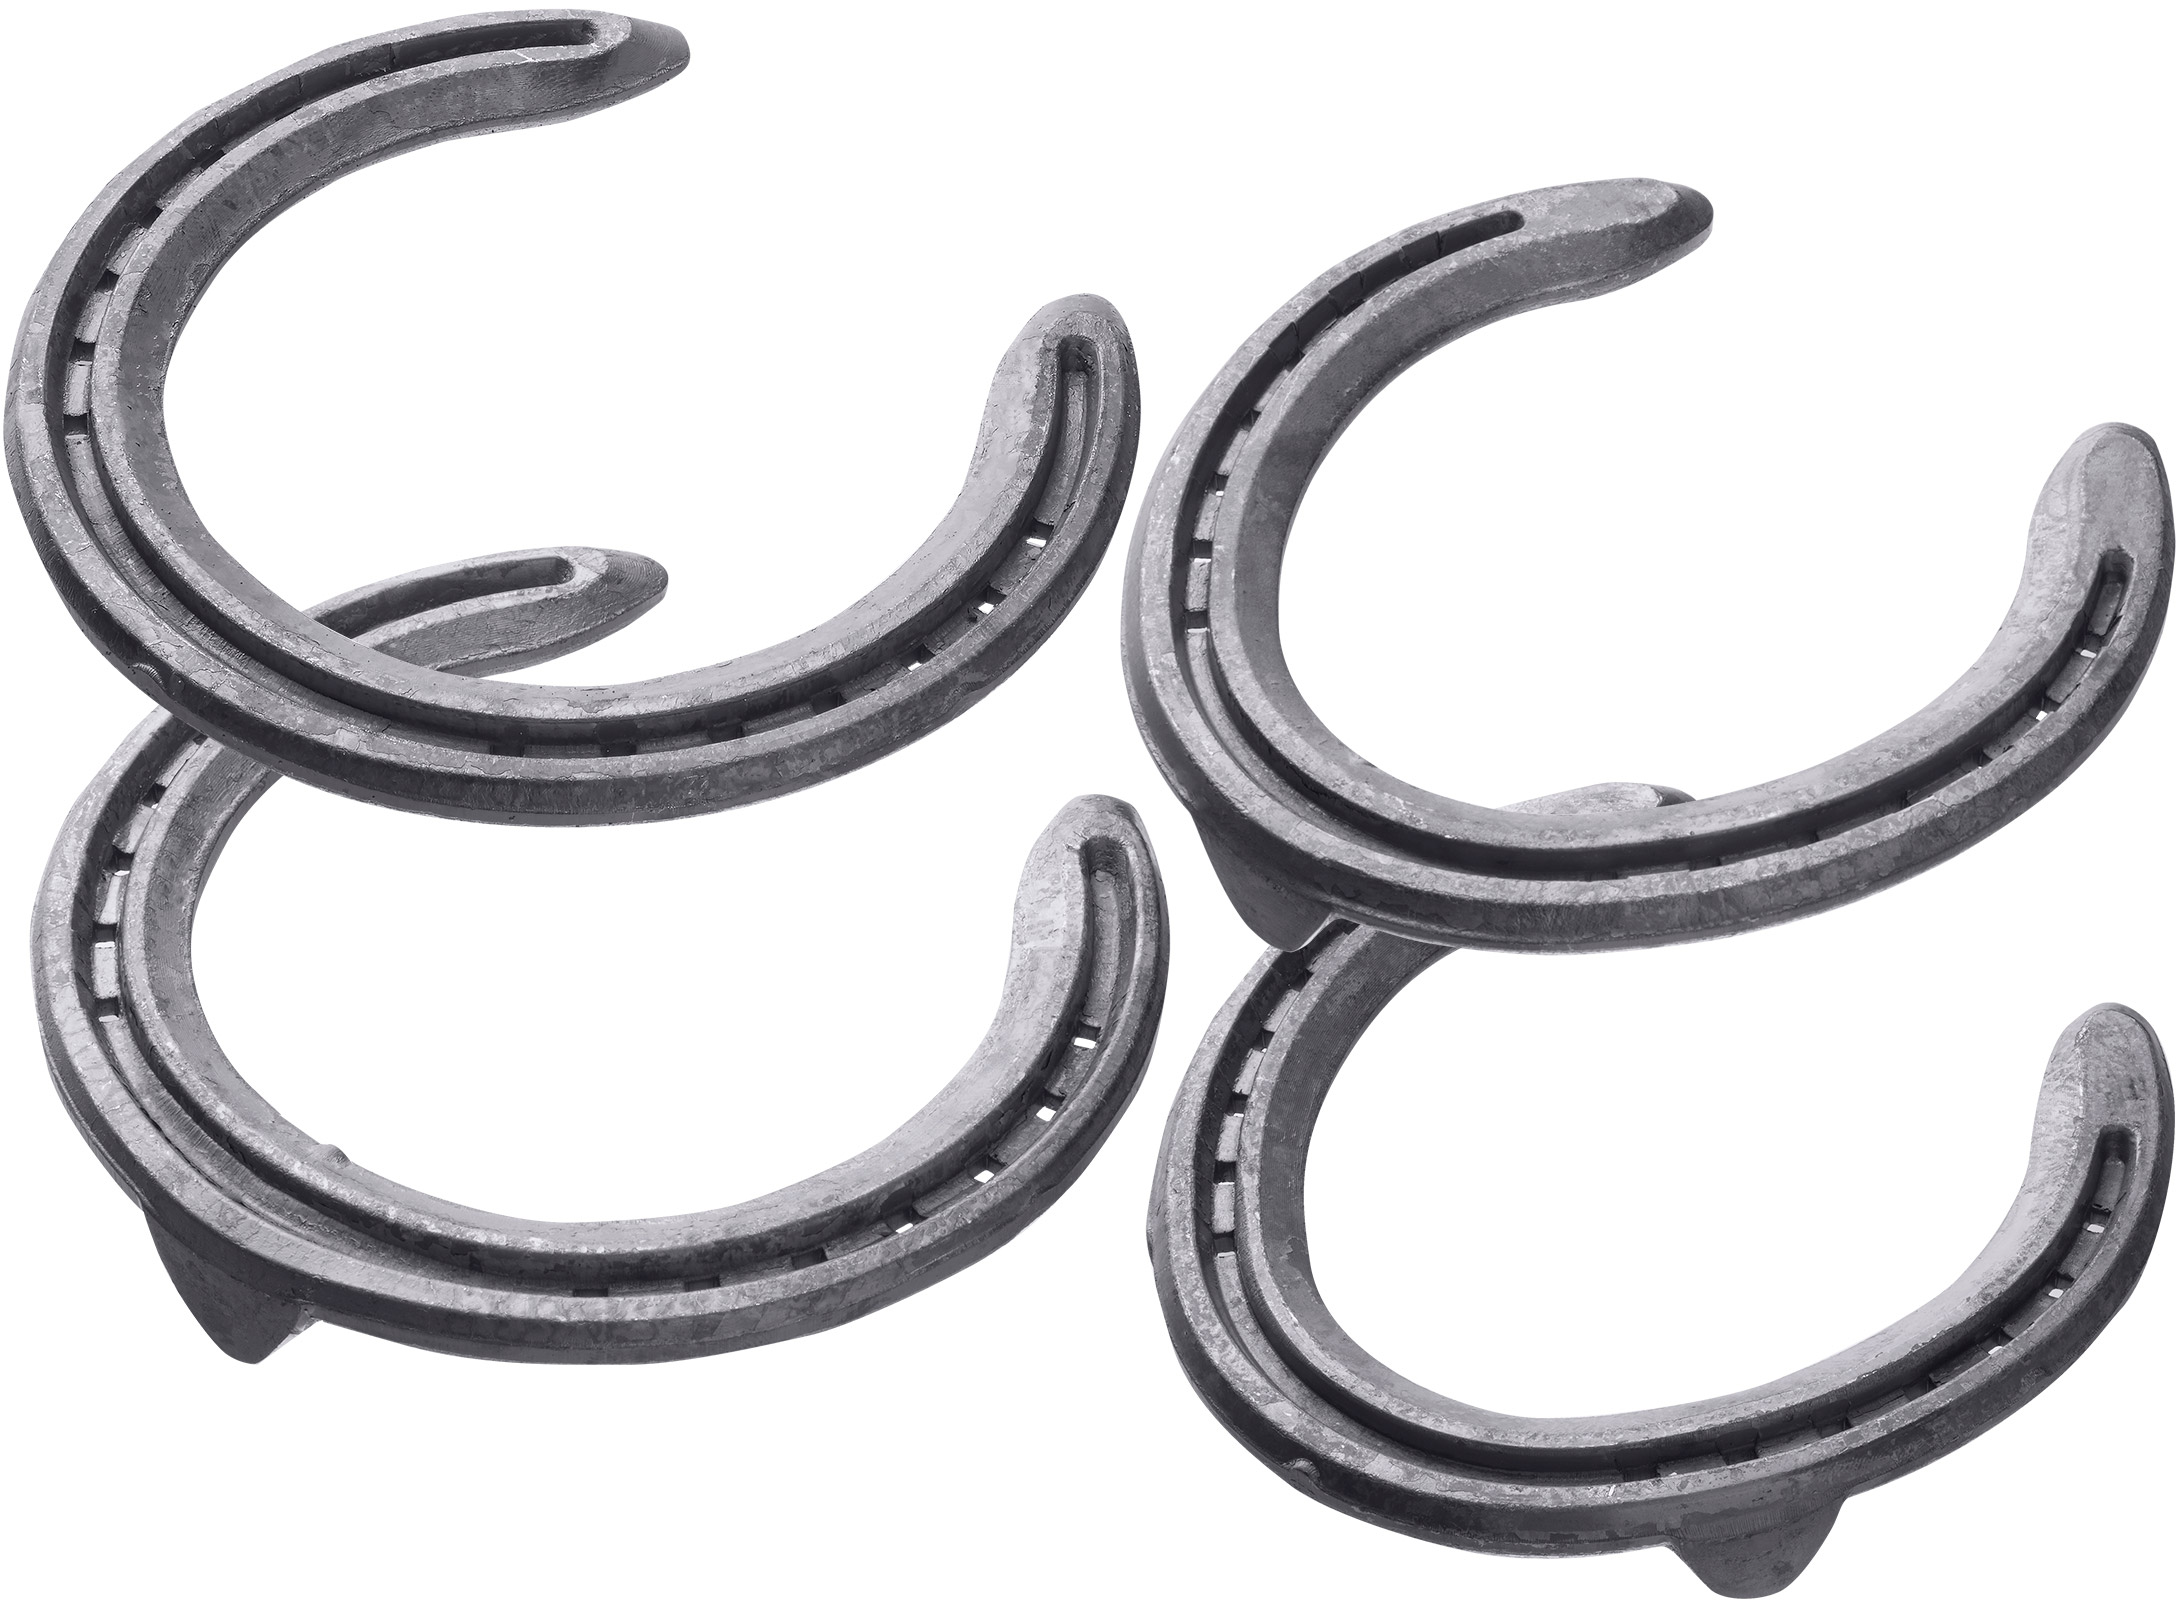 St. Croix Concorde Steel horseshoes, front unclipped and toe clip, hind toe clip and side clips, bottom side view